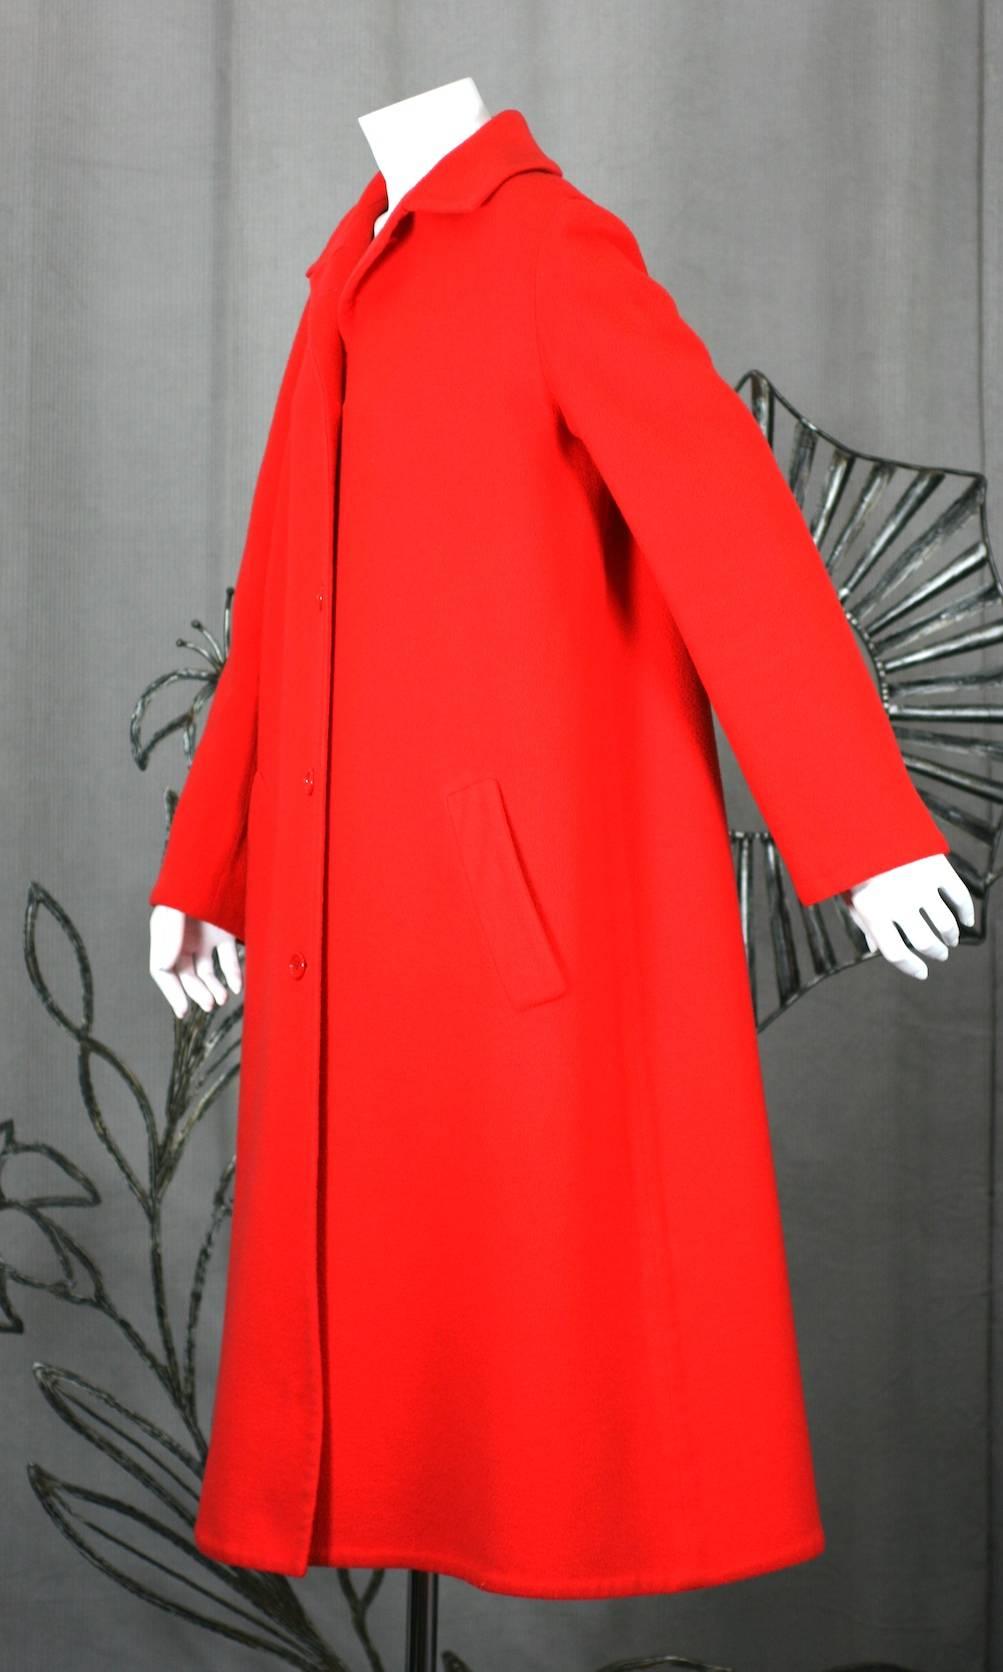 Halston's Double Faced Tomato Red Wool Coat, beautifully cut with simple, slightly flared shape. 5 button front closure with shirt collar and slash pockets. 
Double faced fabrics were among Halston's favorites. They were light, modern, packable and